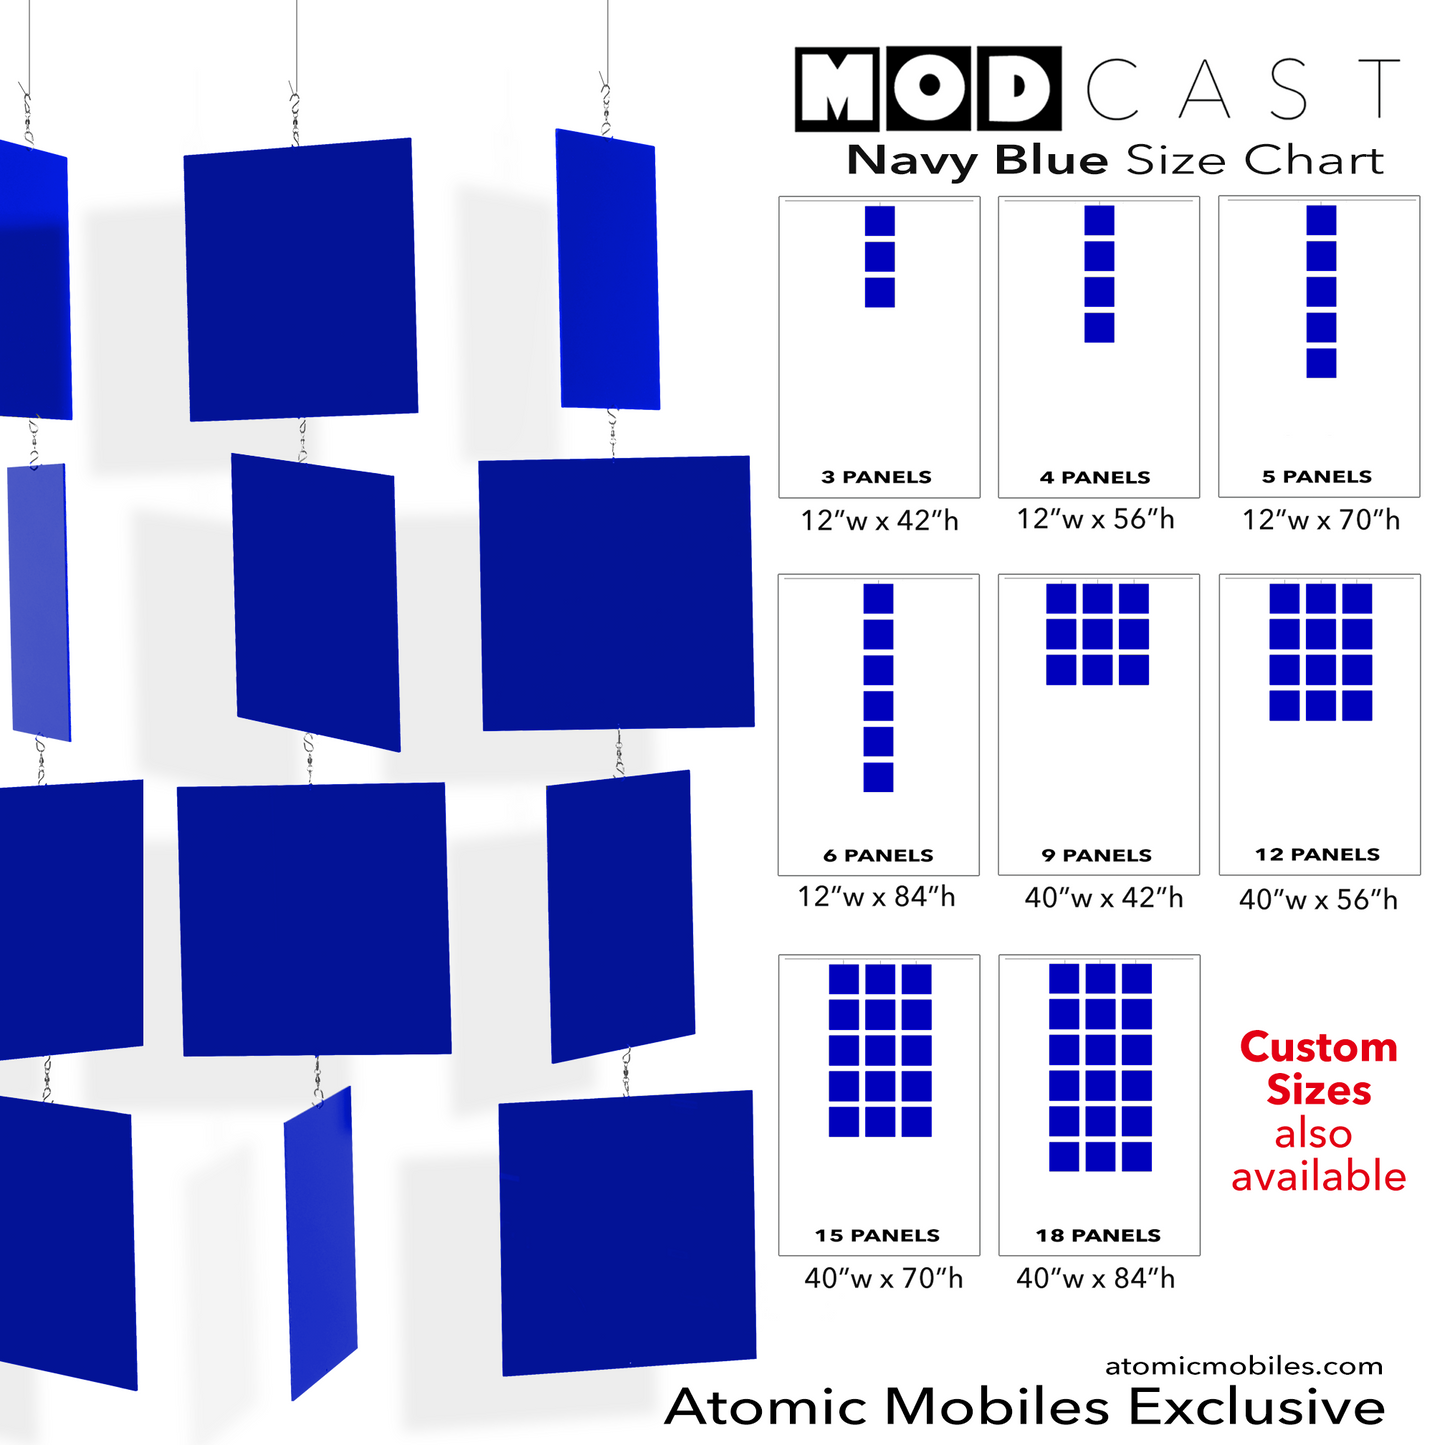 MODcast kinetic hanging art mobiles in Navy Blue glossy acrylic plexiglass panels - mid century modern style home decor by AtomicMobiles.com